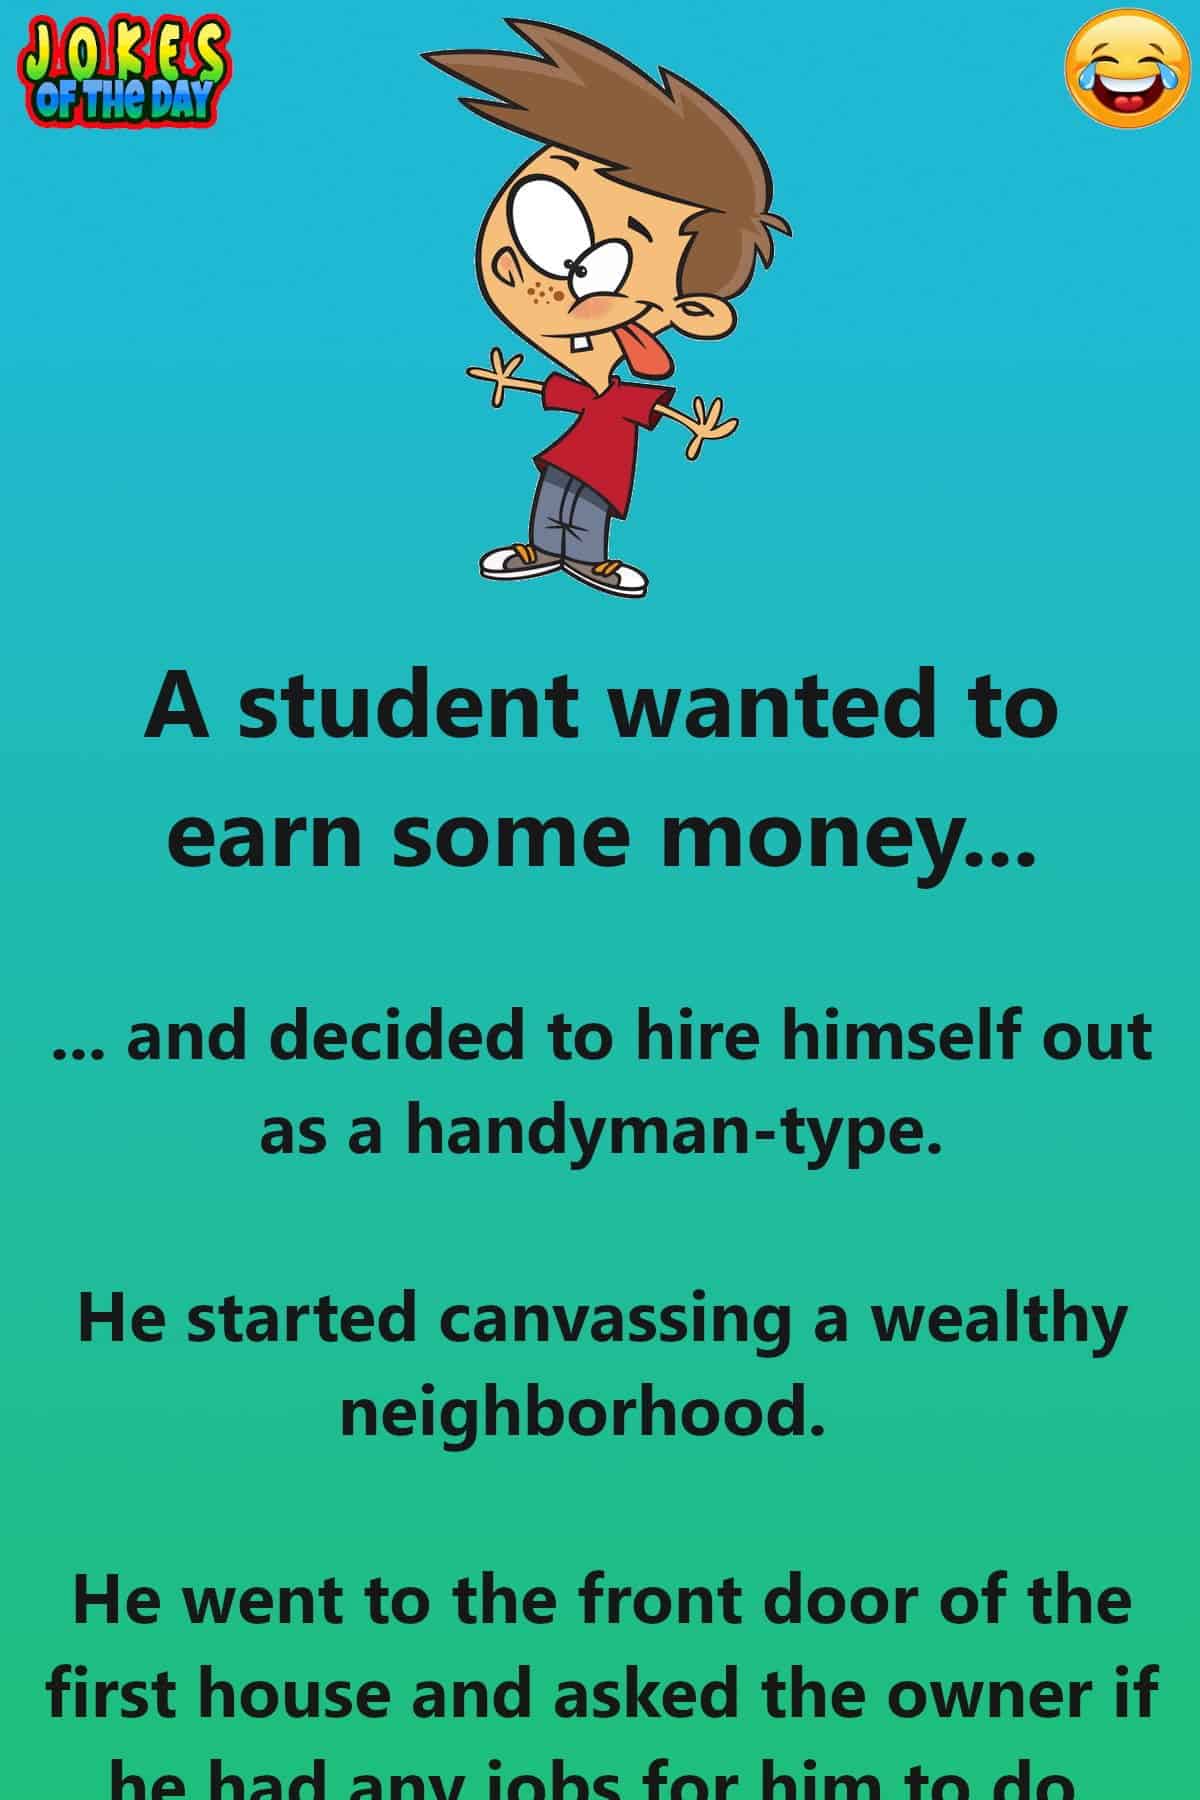 Funny Joke Of The Day - A student wanted to earn some money